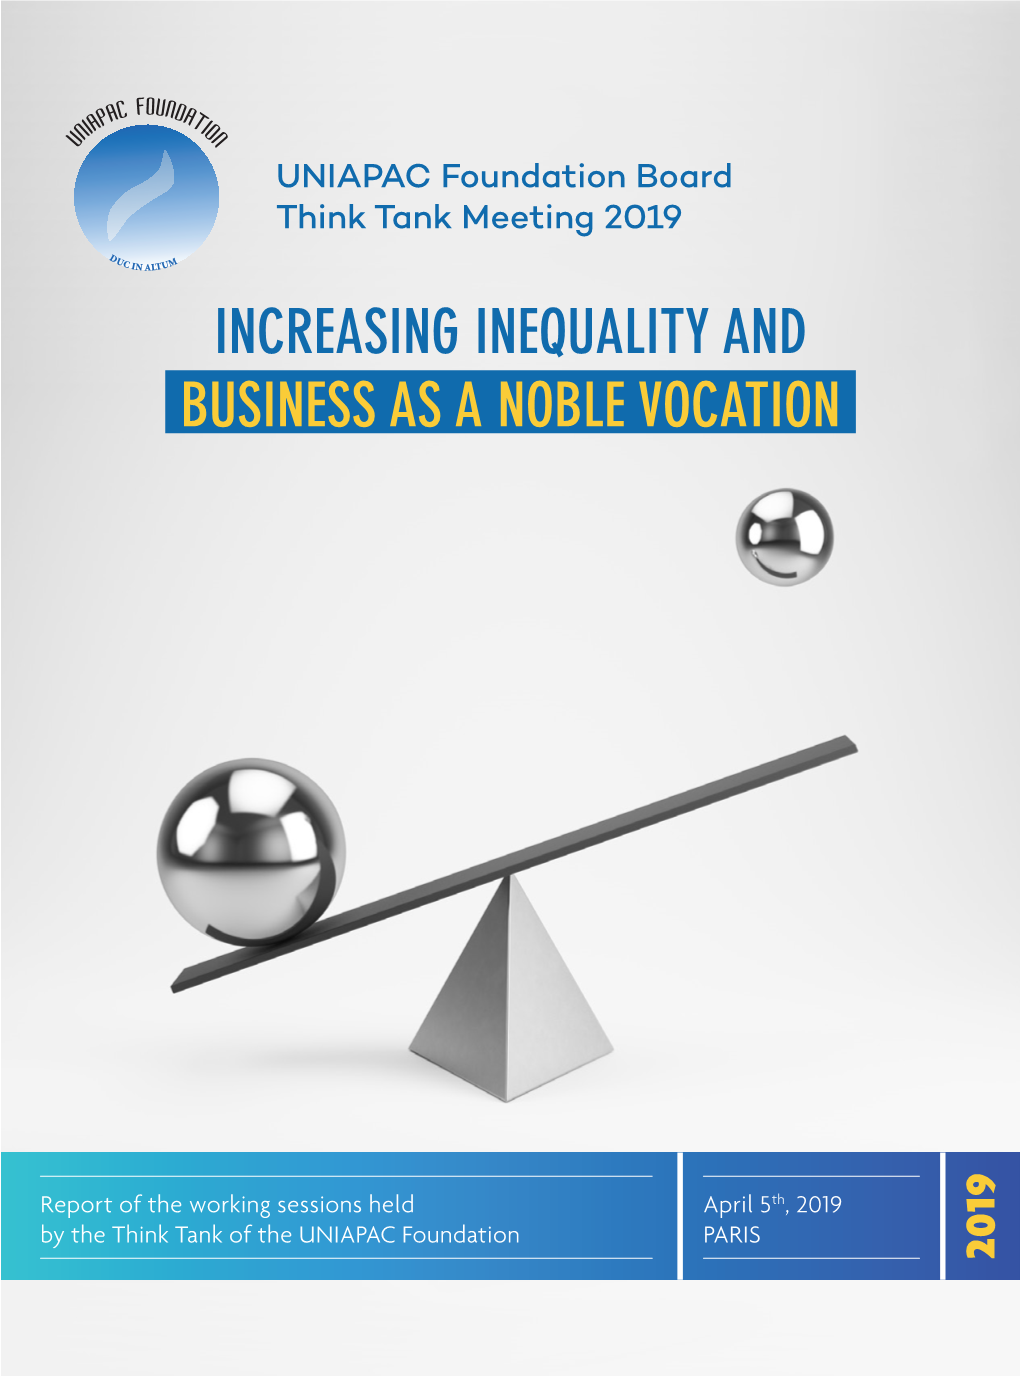 Increasing Inequality and Business As a Noble Vocation